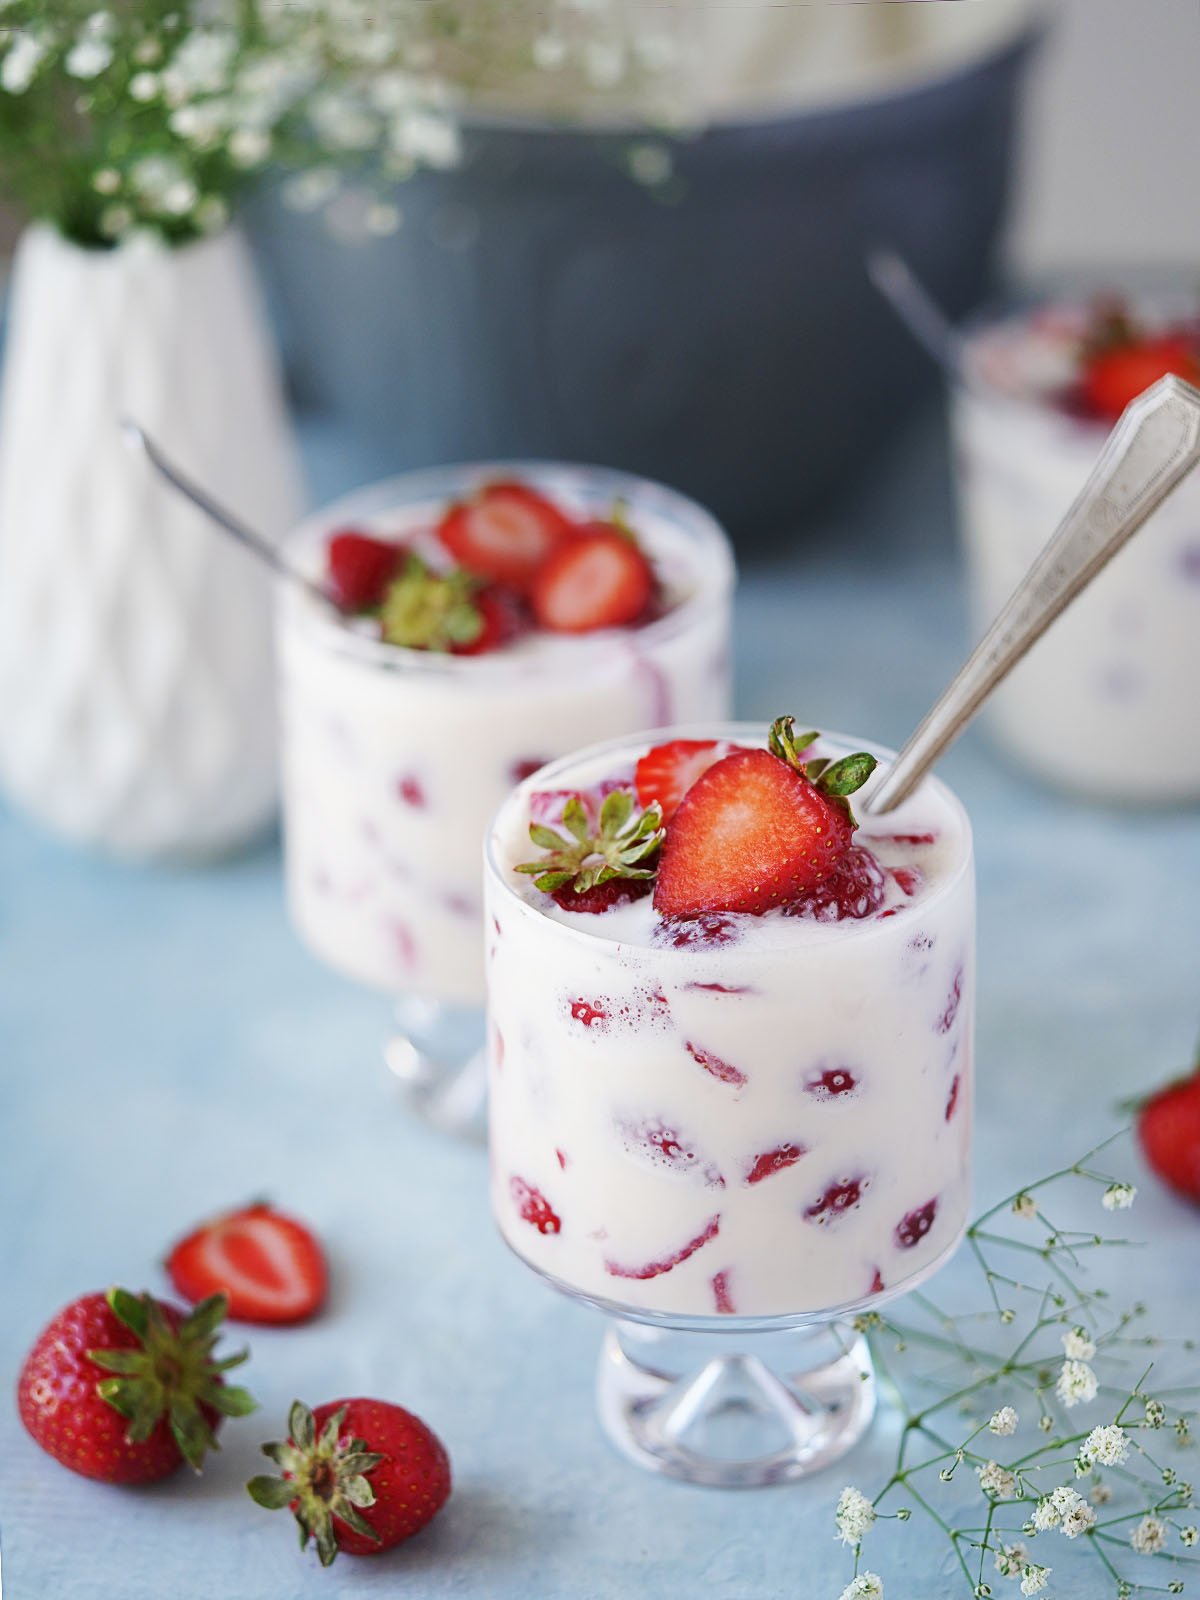 Three small glasses with strawberries and cream and a spoon.